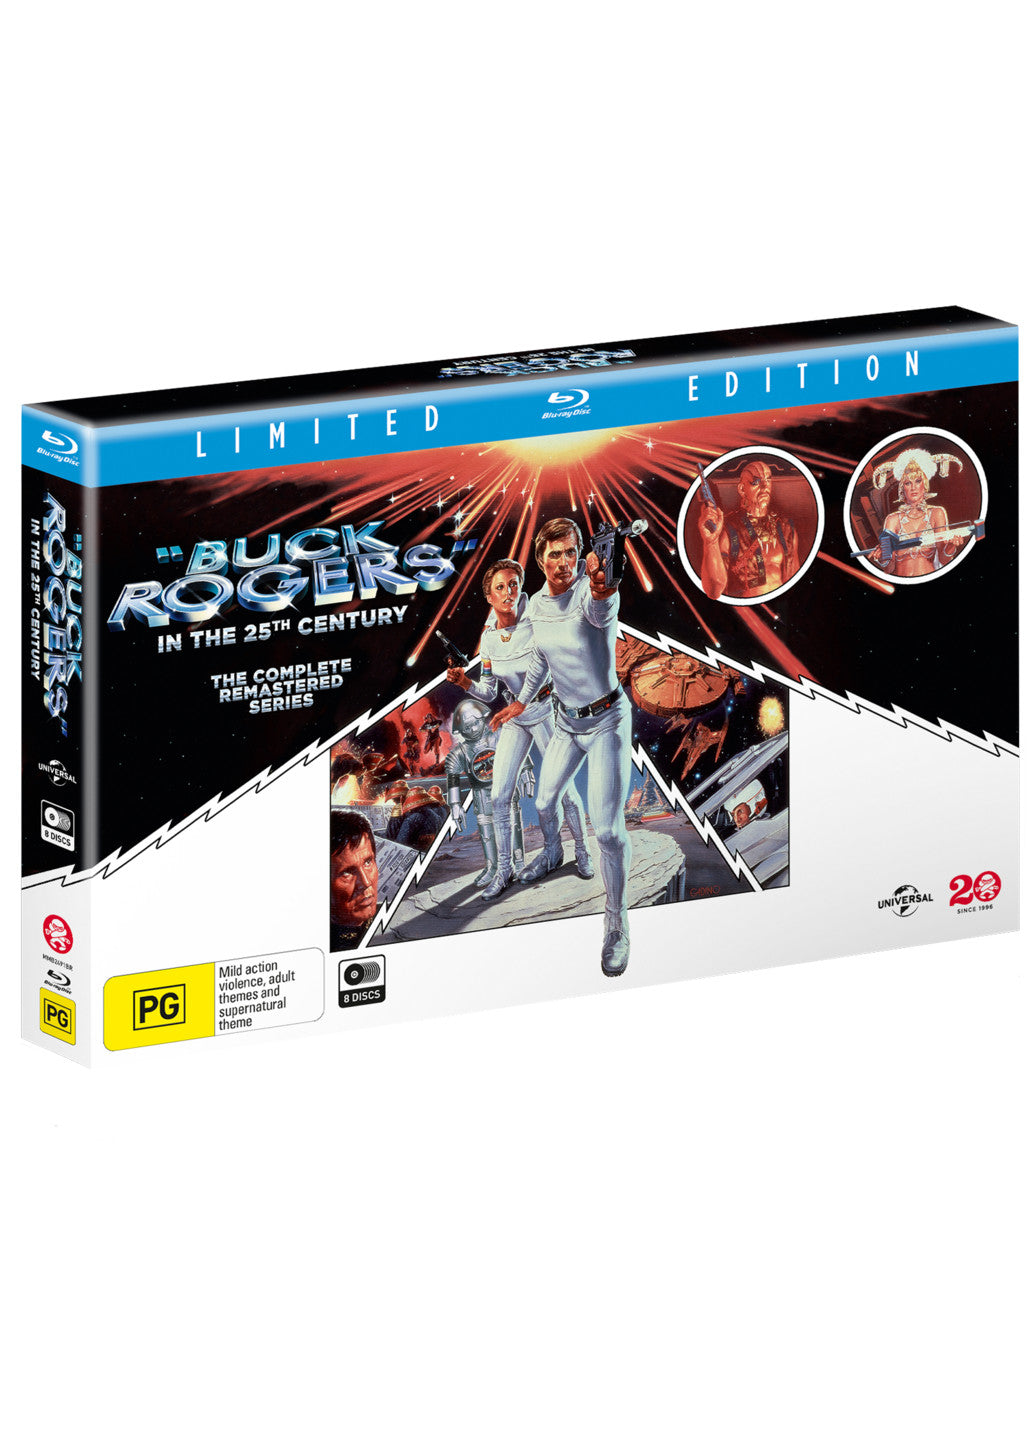 BUCK ROGERS IN THE 25TH CENTURY: THE COMPLETE SERIES (BLU RAY)